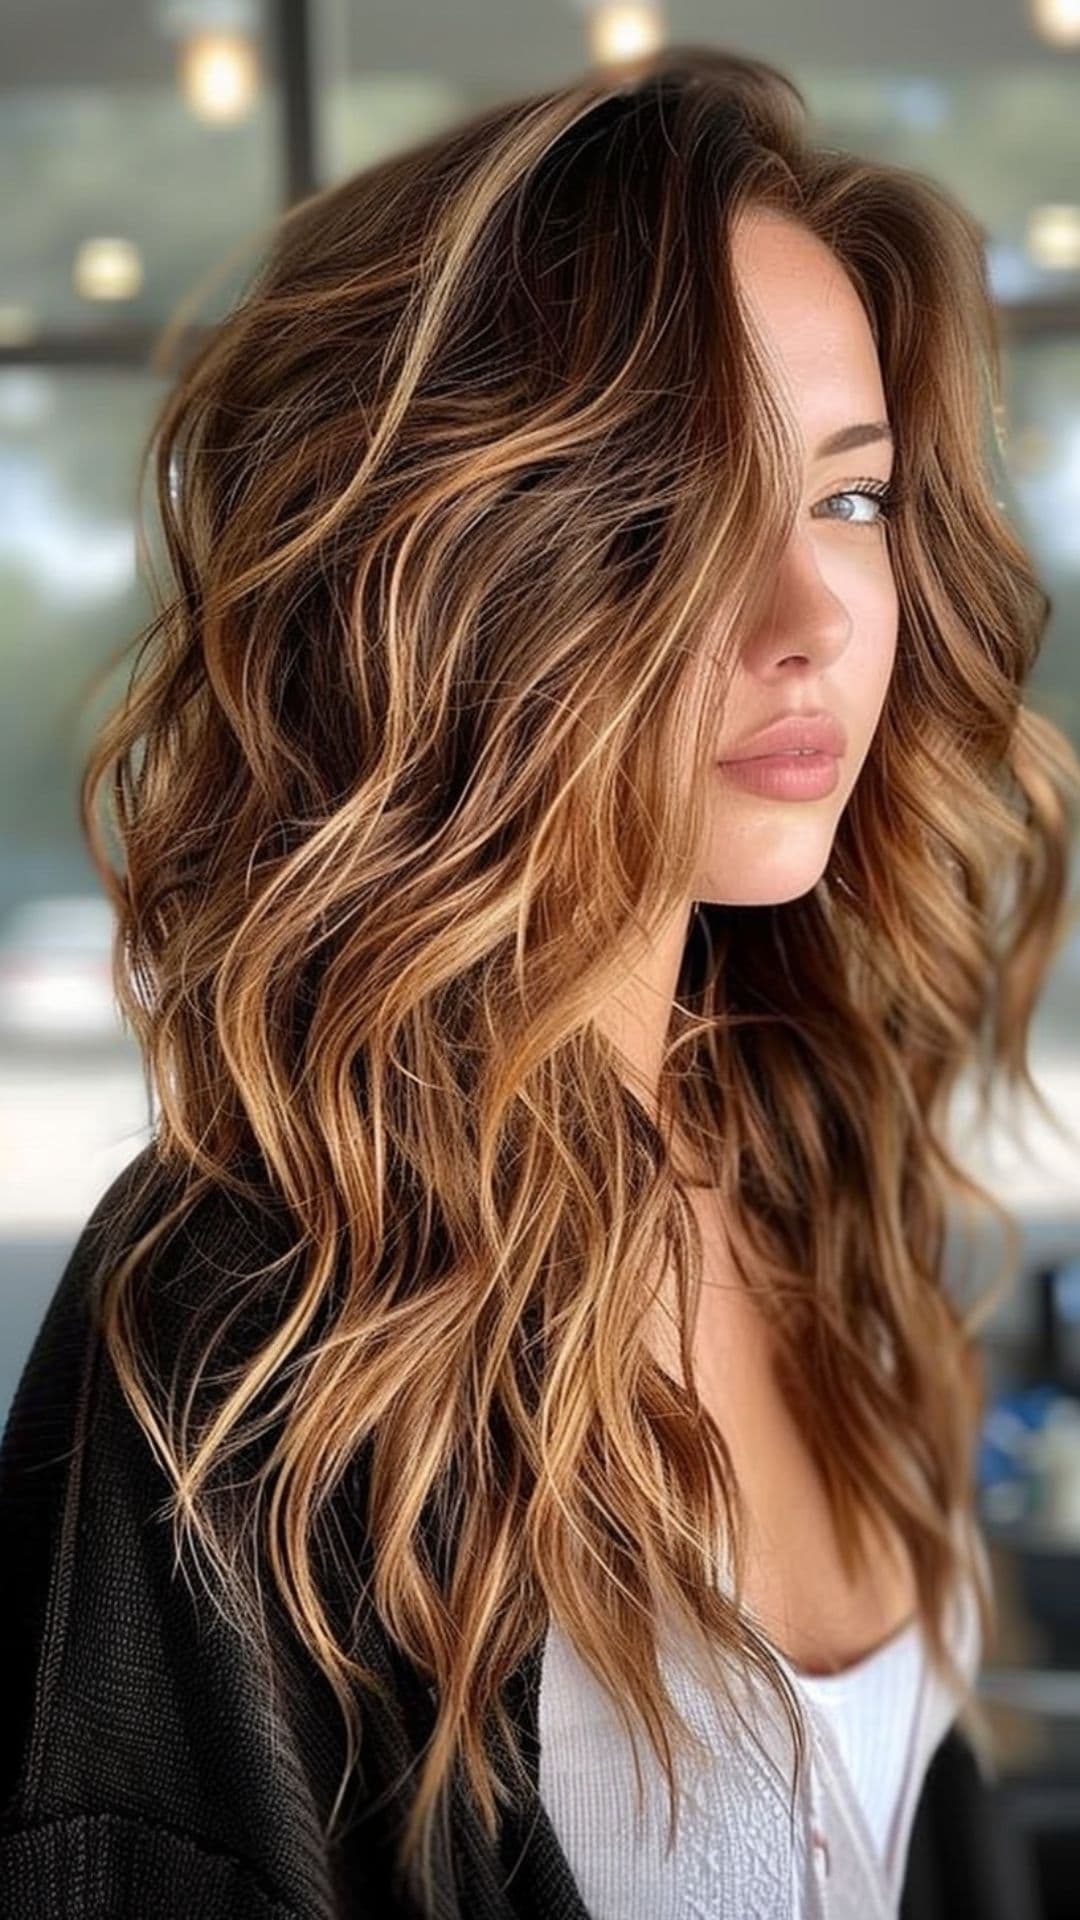 A woman modelling a textured layers with balayage highlights hairstyle.